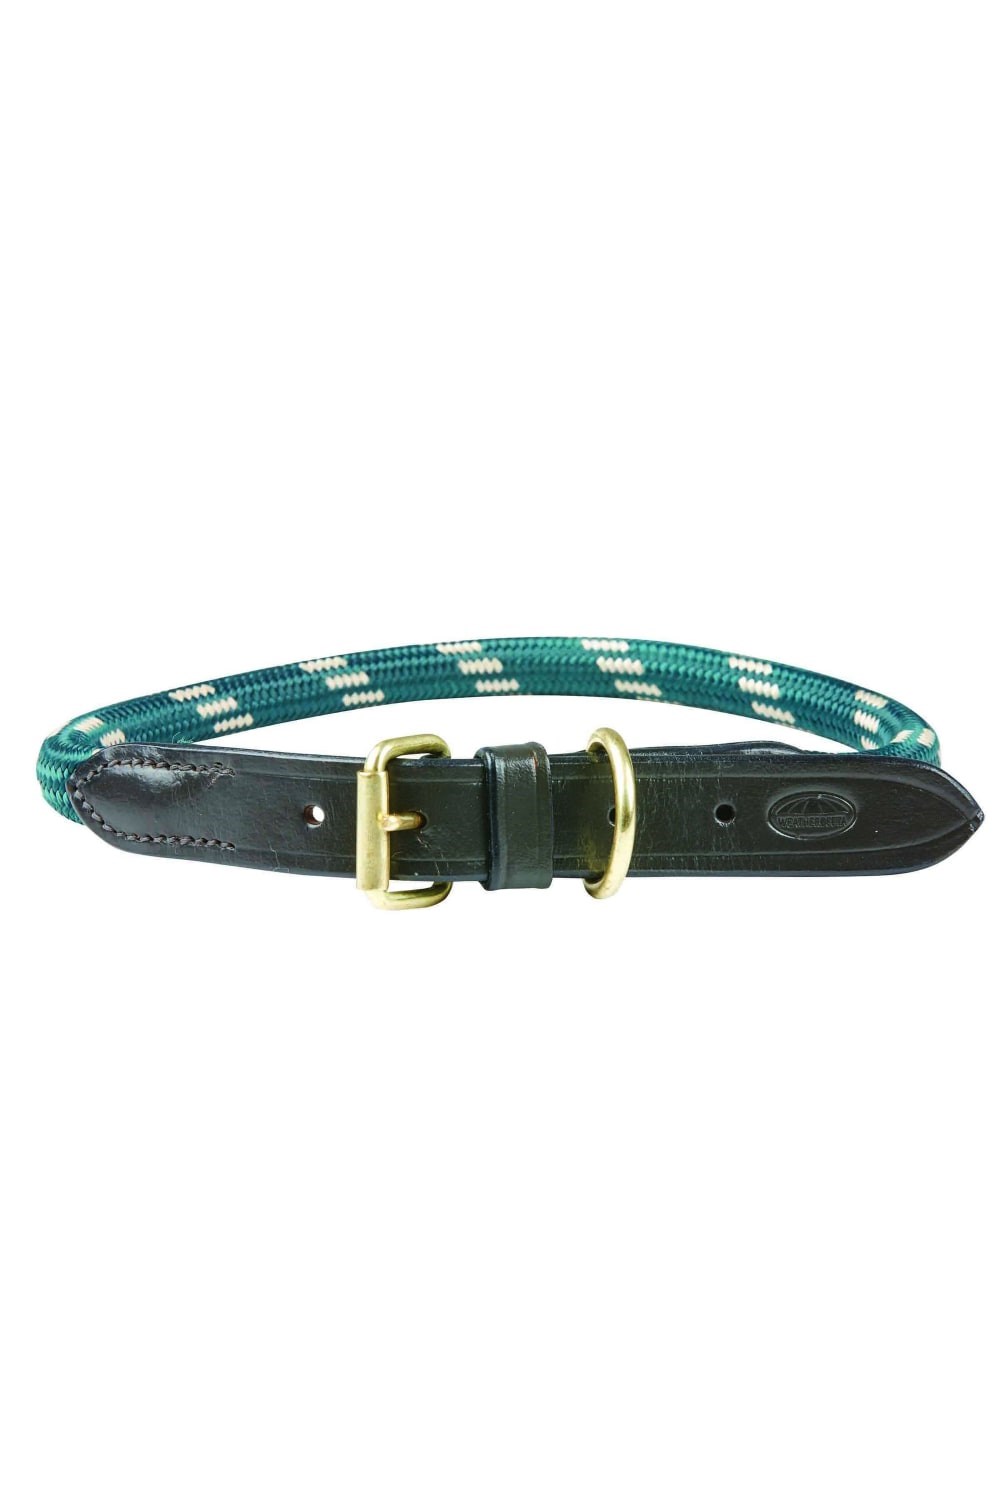 Rope Leather Dog Collar -